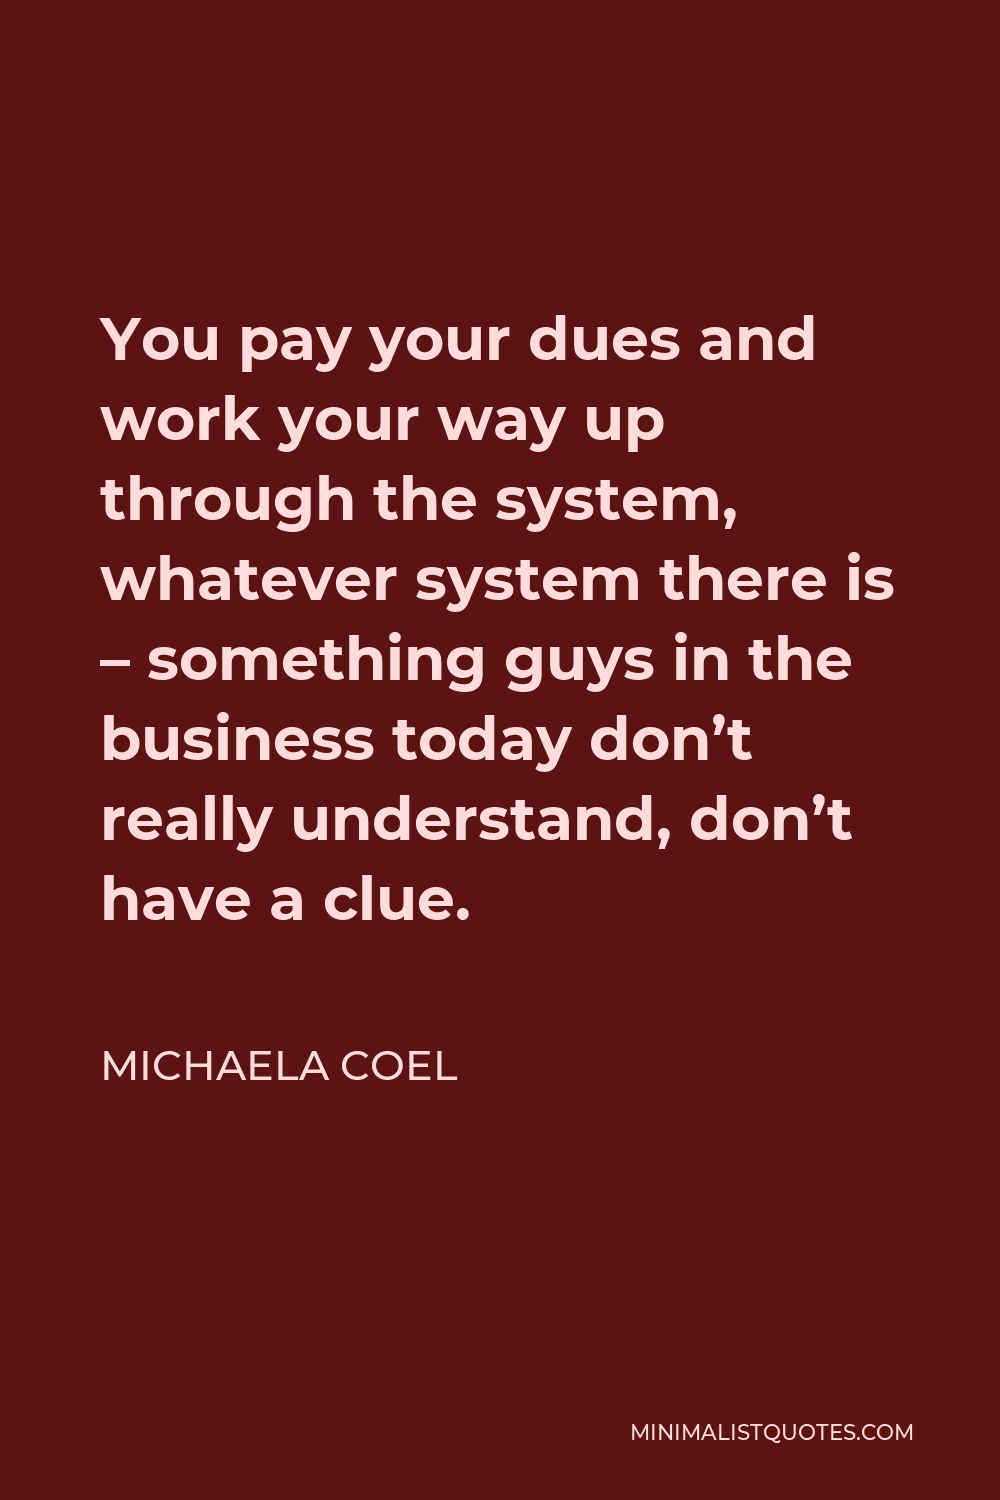 Michaela Coel Quote - You pay your dues and work your way up through the system, whatever system there is – something guys in the business today don’t really understand, don’t have a clue.